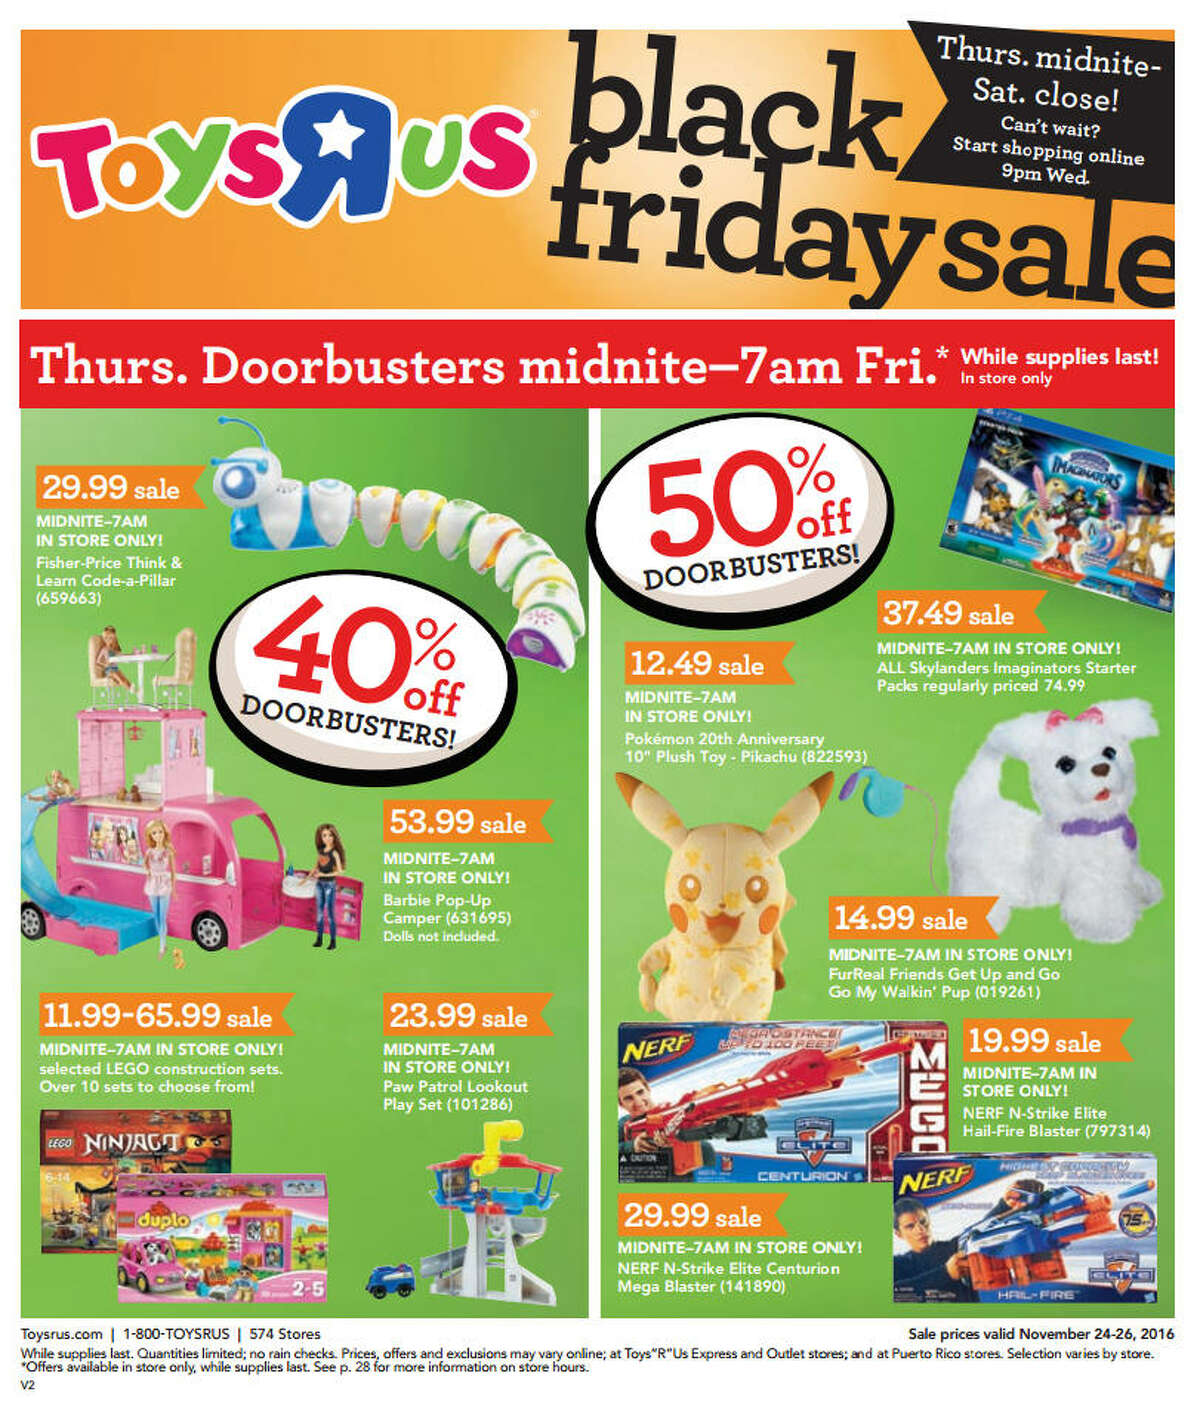 Toys "R" Us released their Black Friday 2016 ad ahead of Thanksgiving week. The ad has deals starting 5 p.m. Thanksgiving day and going until Saturday at close time.